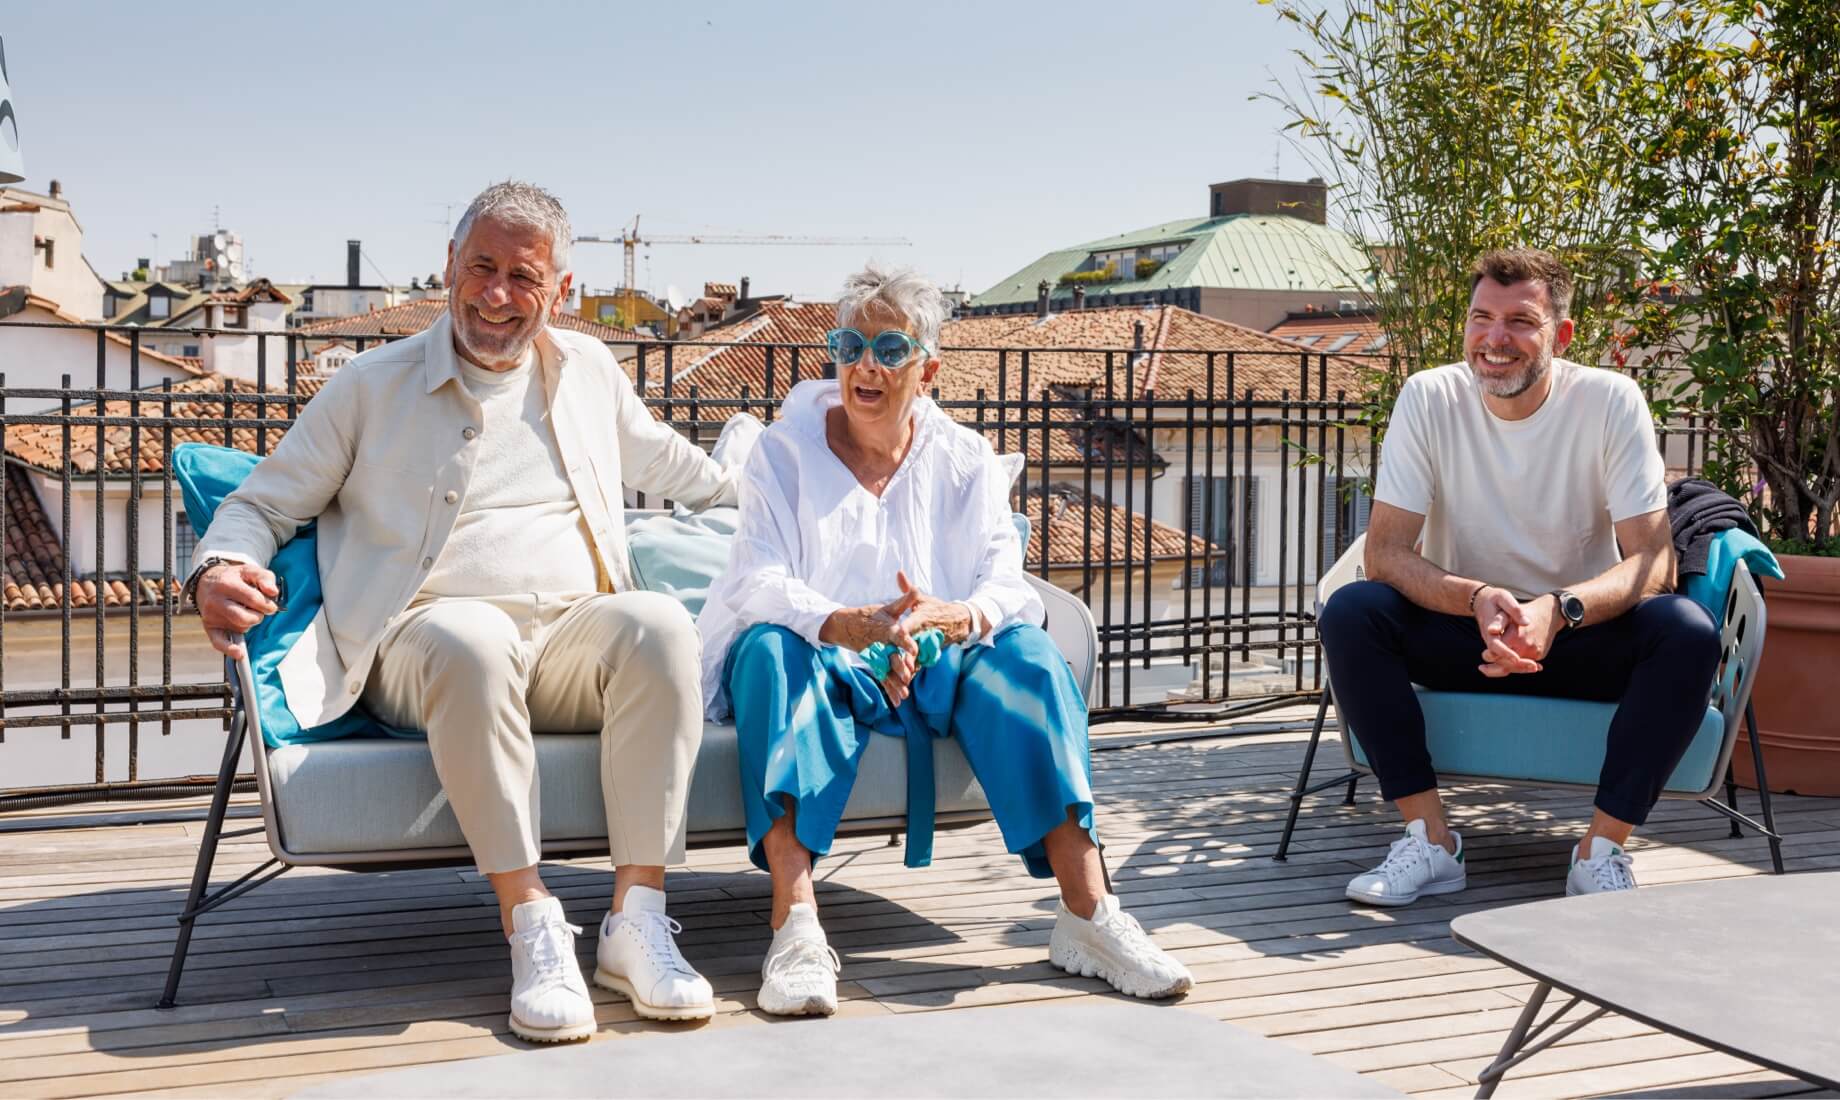 From left: President Midj Paolo Vernier, Designer Paola Navone, Production Manager Rudy Vernier.